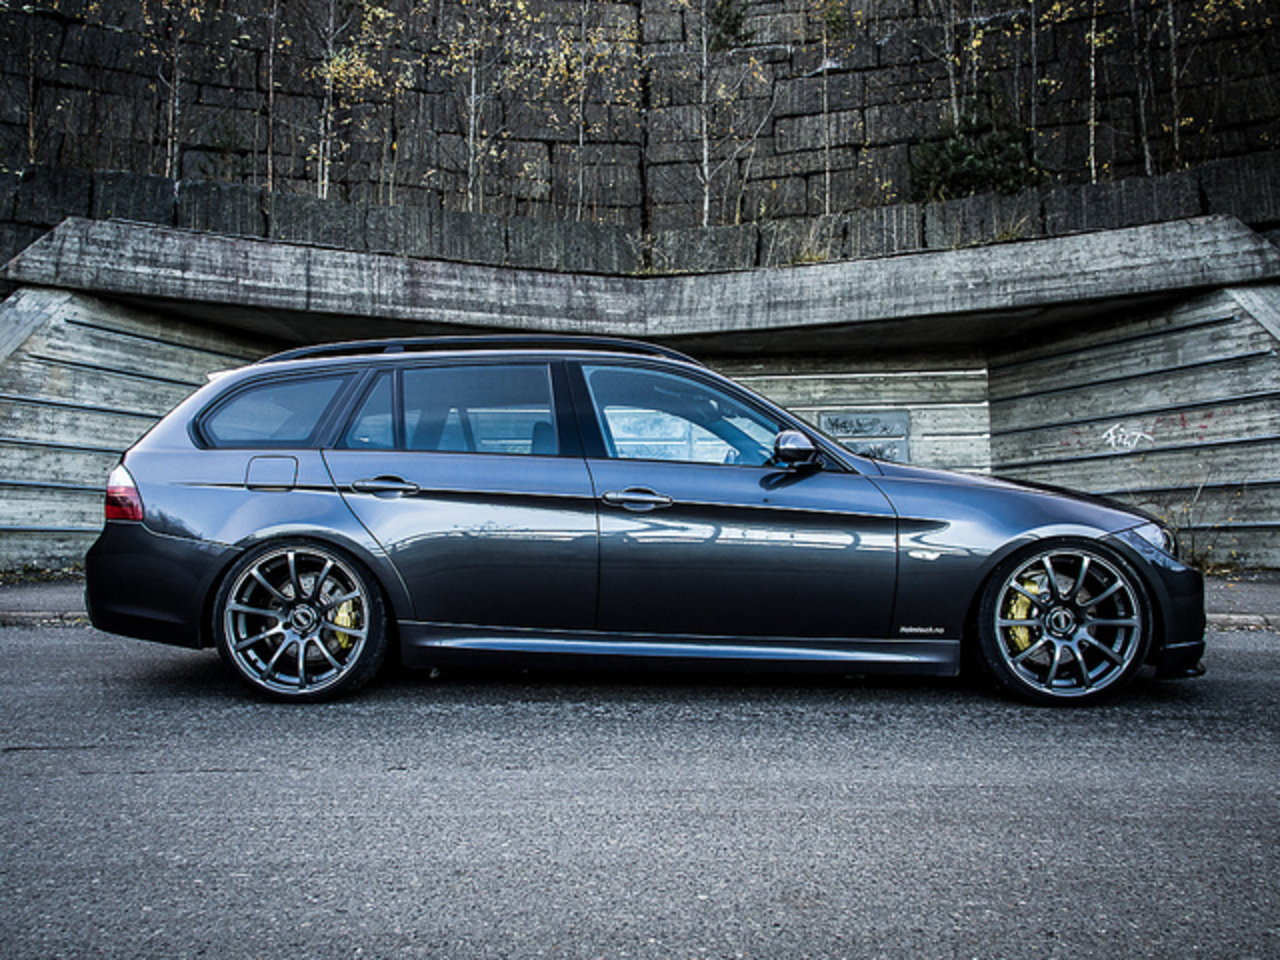 BMW 325D E91 | Flickr - Photo Sharing!